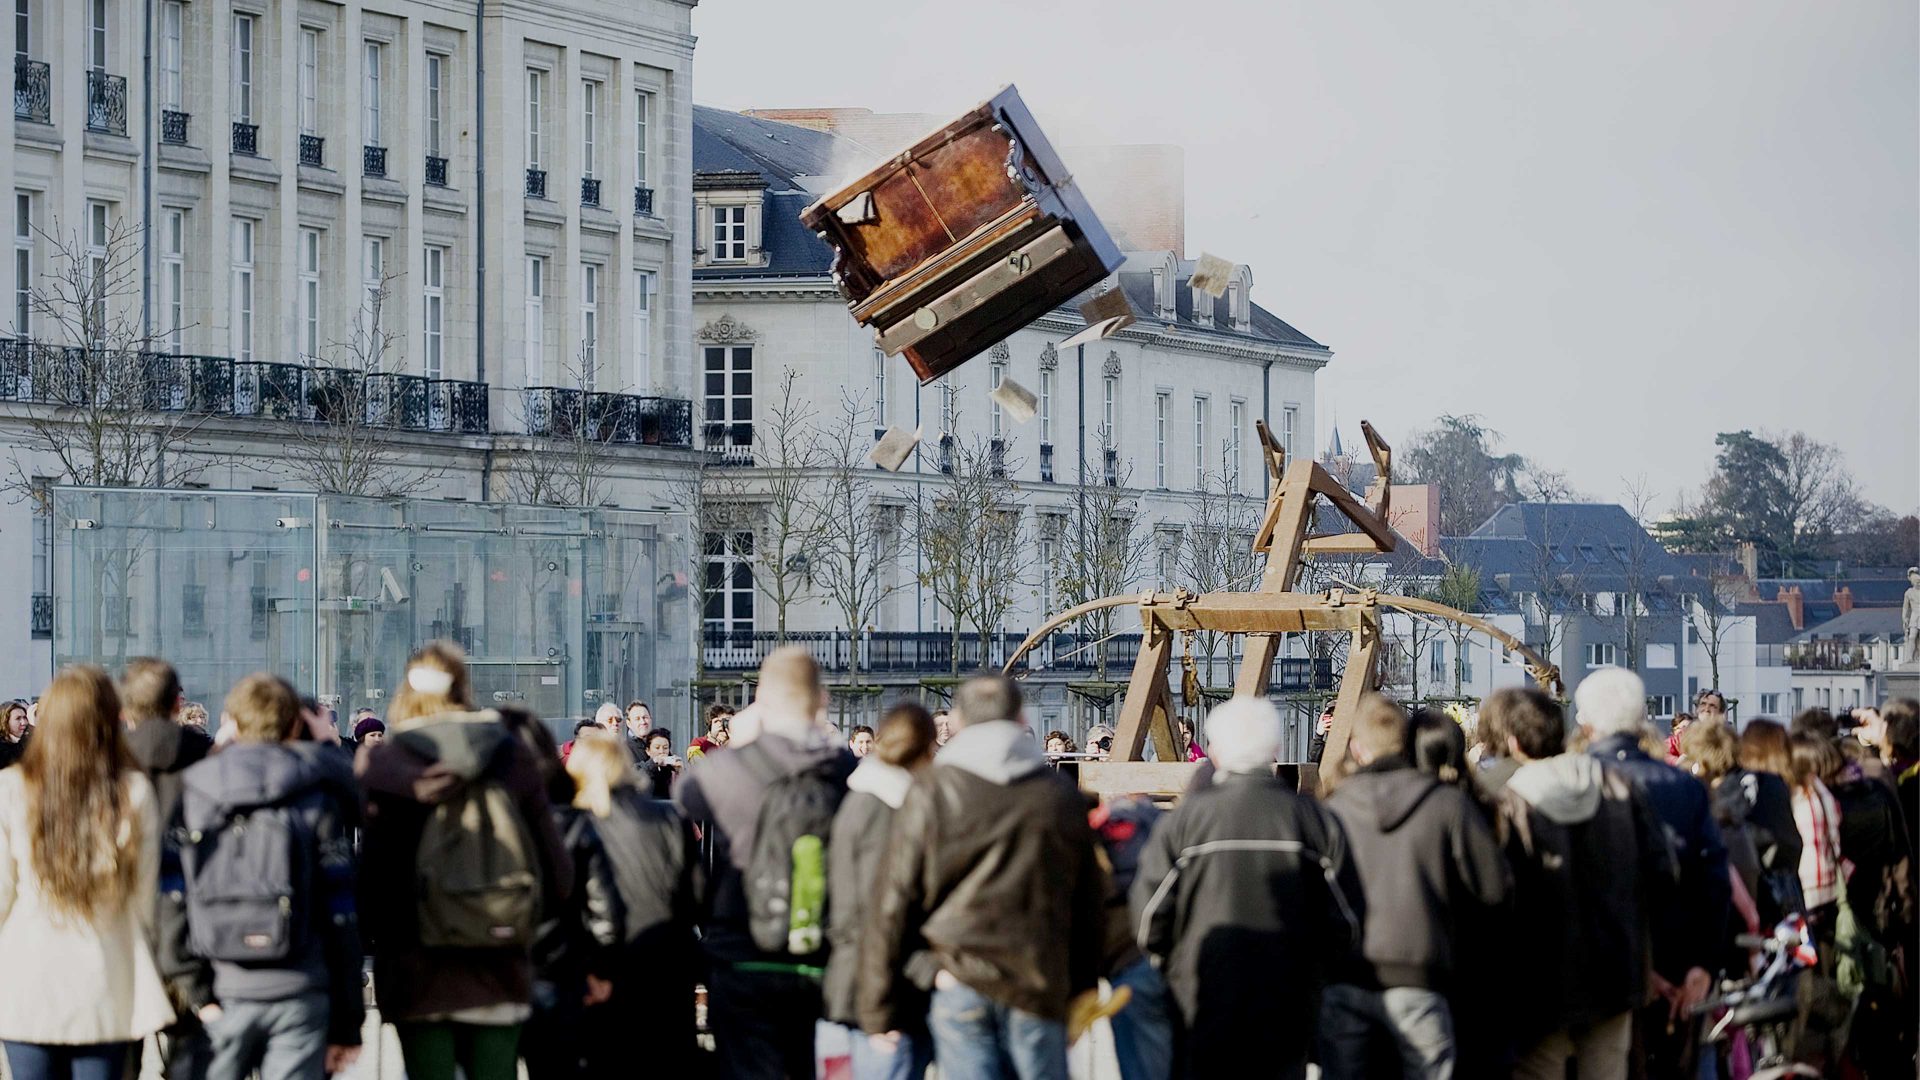 Members of the public look at a piano throw with a catapult during a Royal de Luxe street theatre performance in Nantes. Photo: JEAN-SEBASTIEN EVRARD/AFP via Getty Images